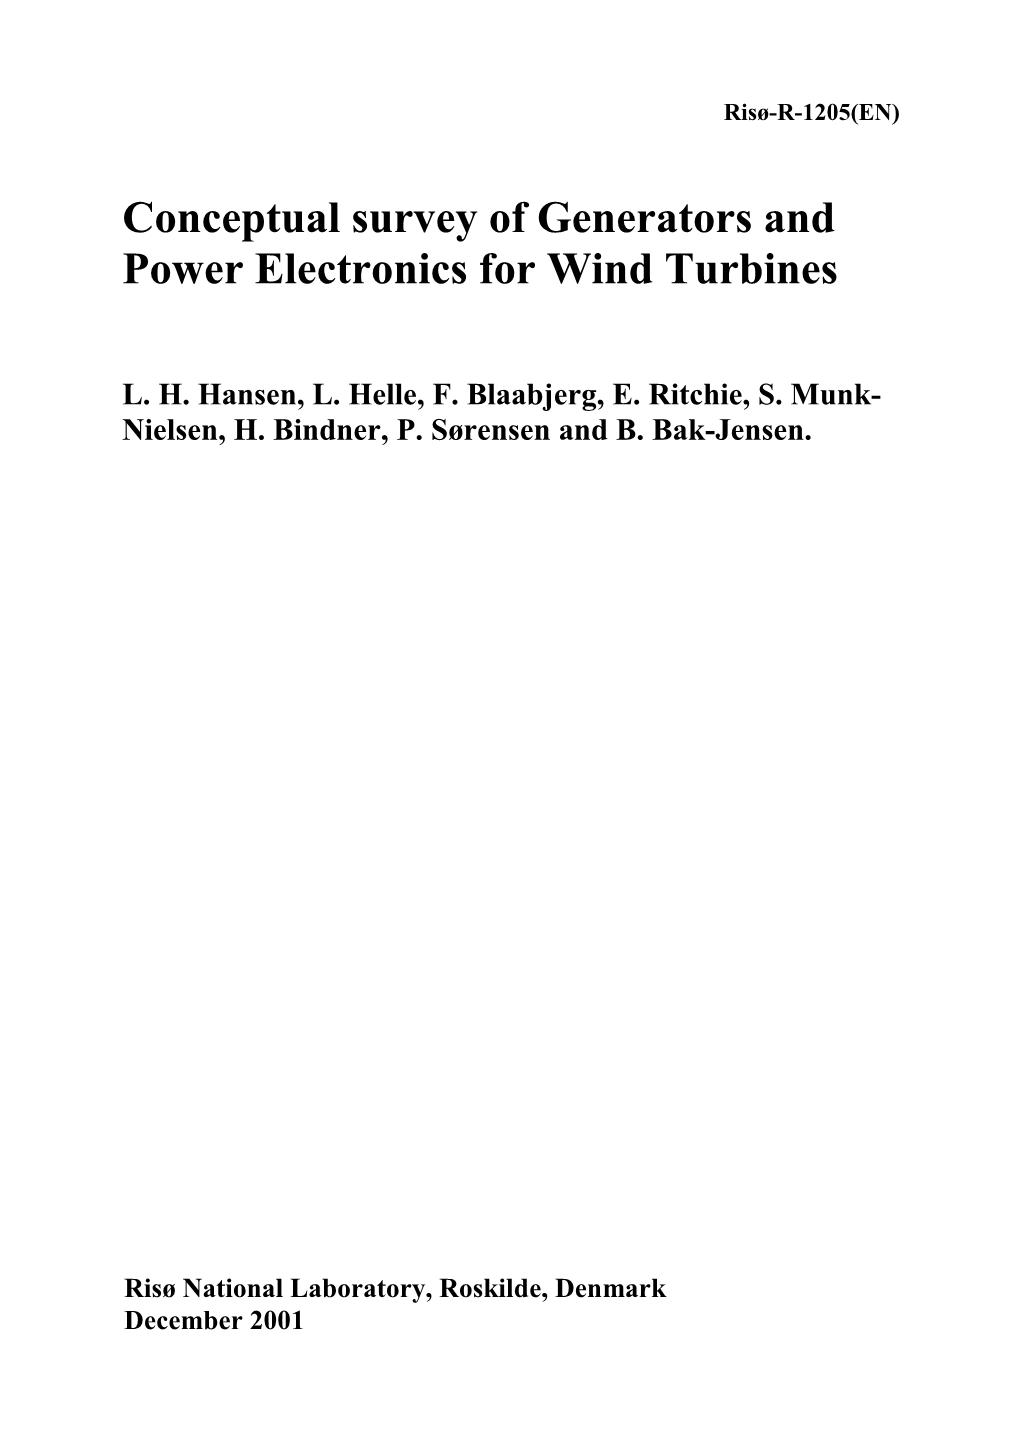 Conceptual Survey of Generators and Power Electronics for Wind Turbines